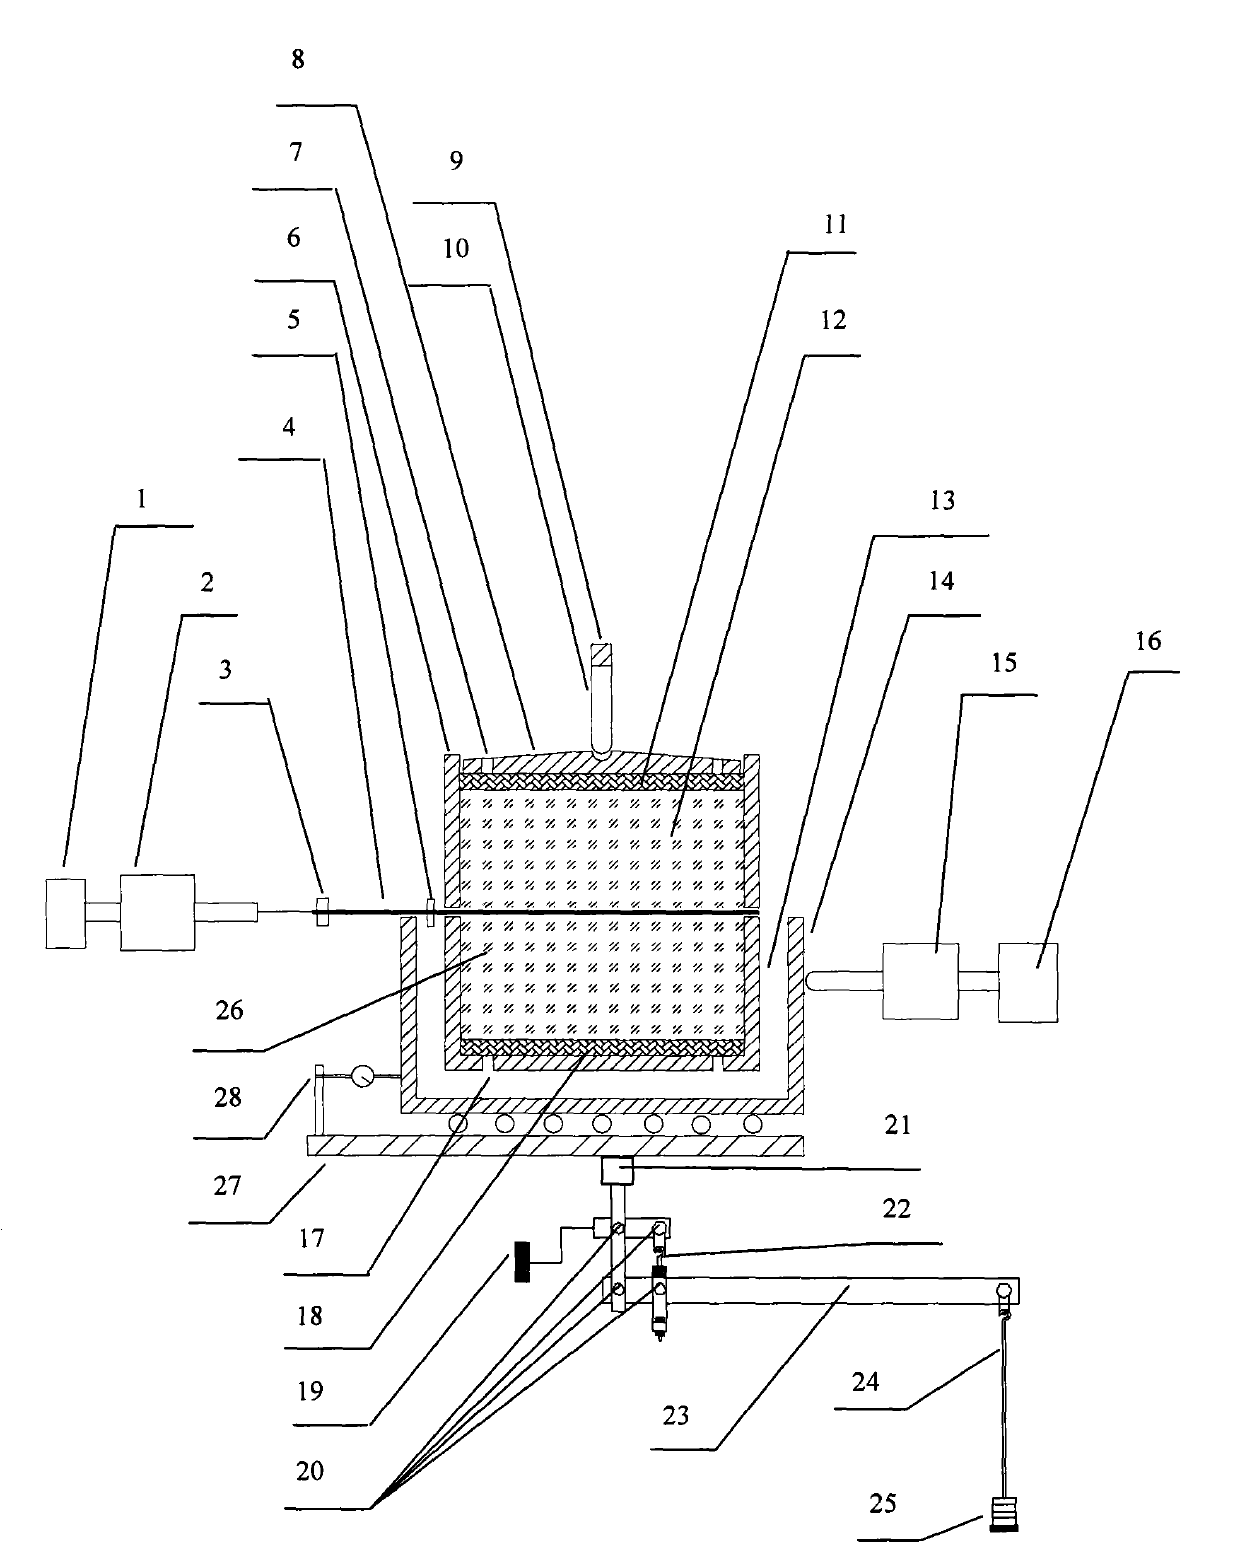 Drawing and shear testing device for geosynthetics